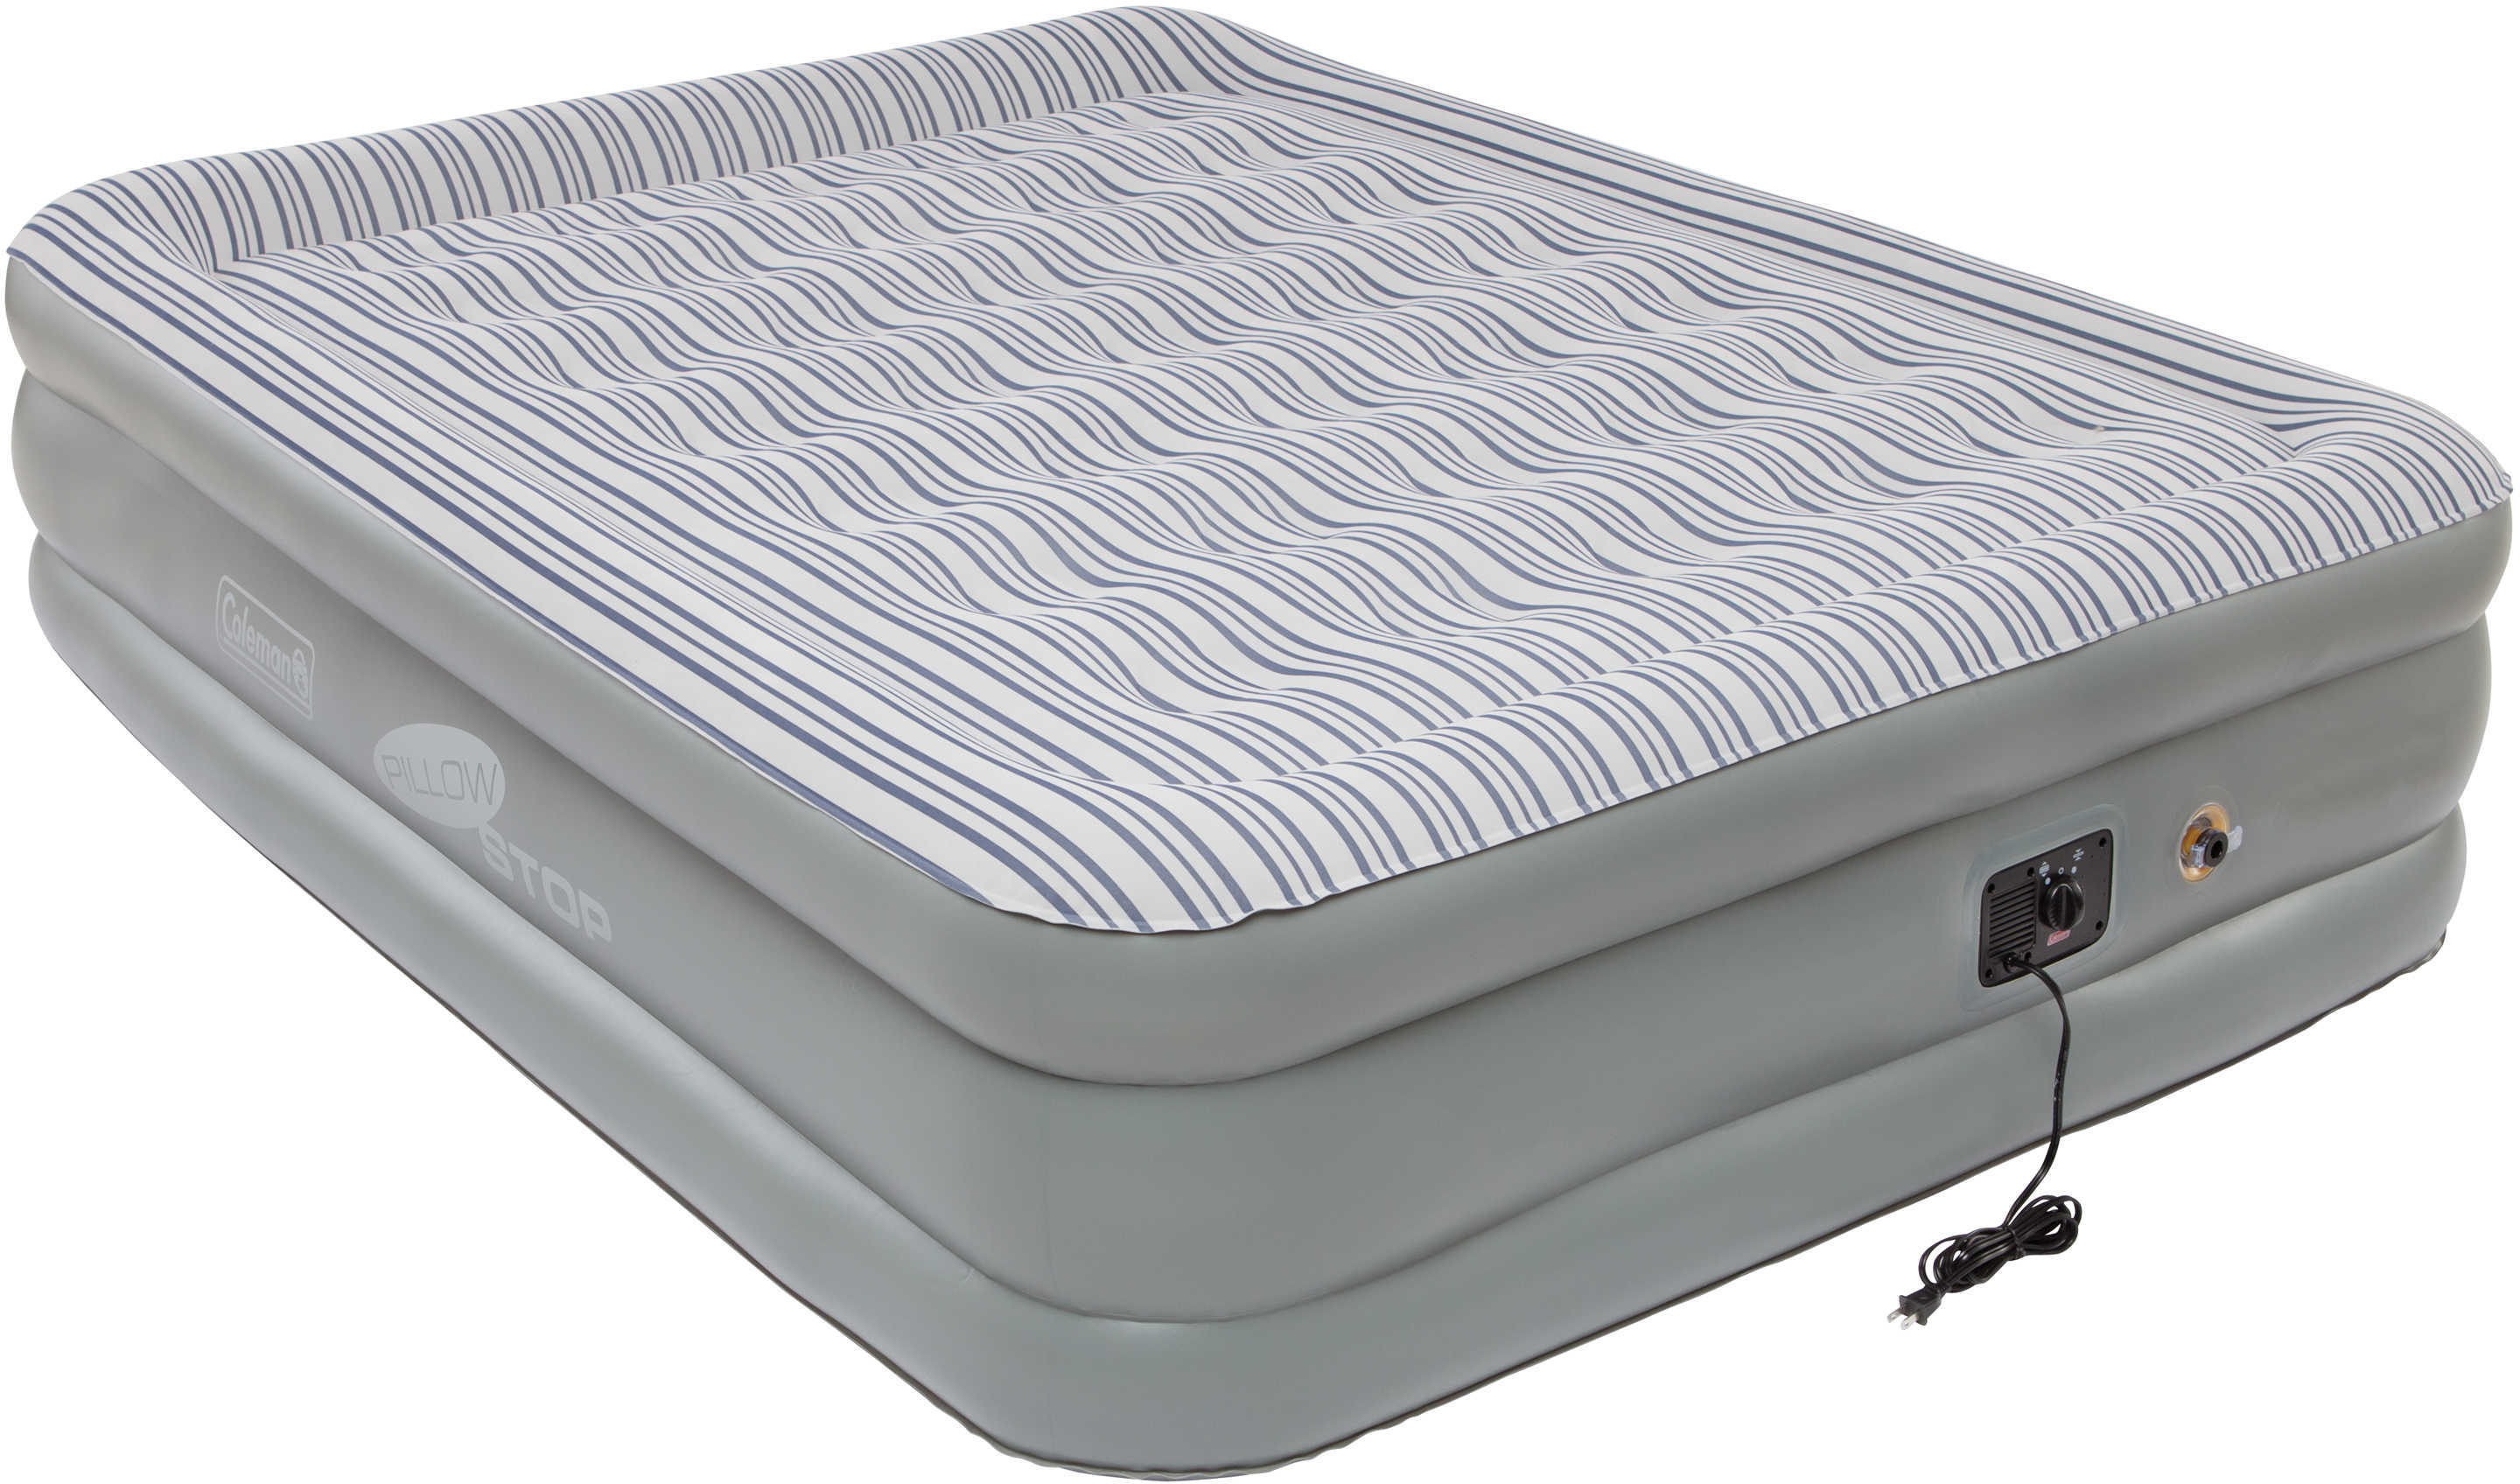 Coleman Supportrest Elite Pillowstop Double High Airbed, Queen